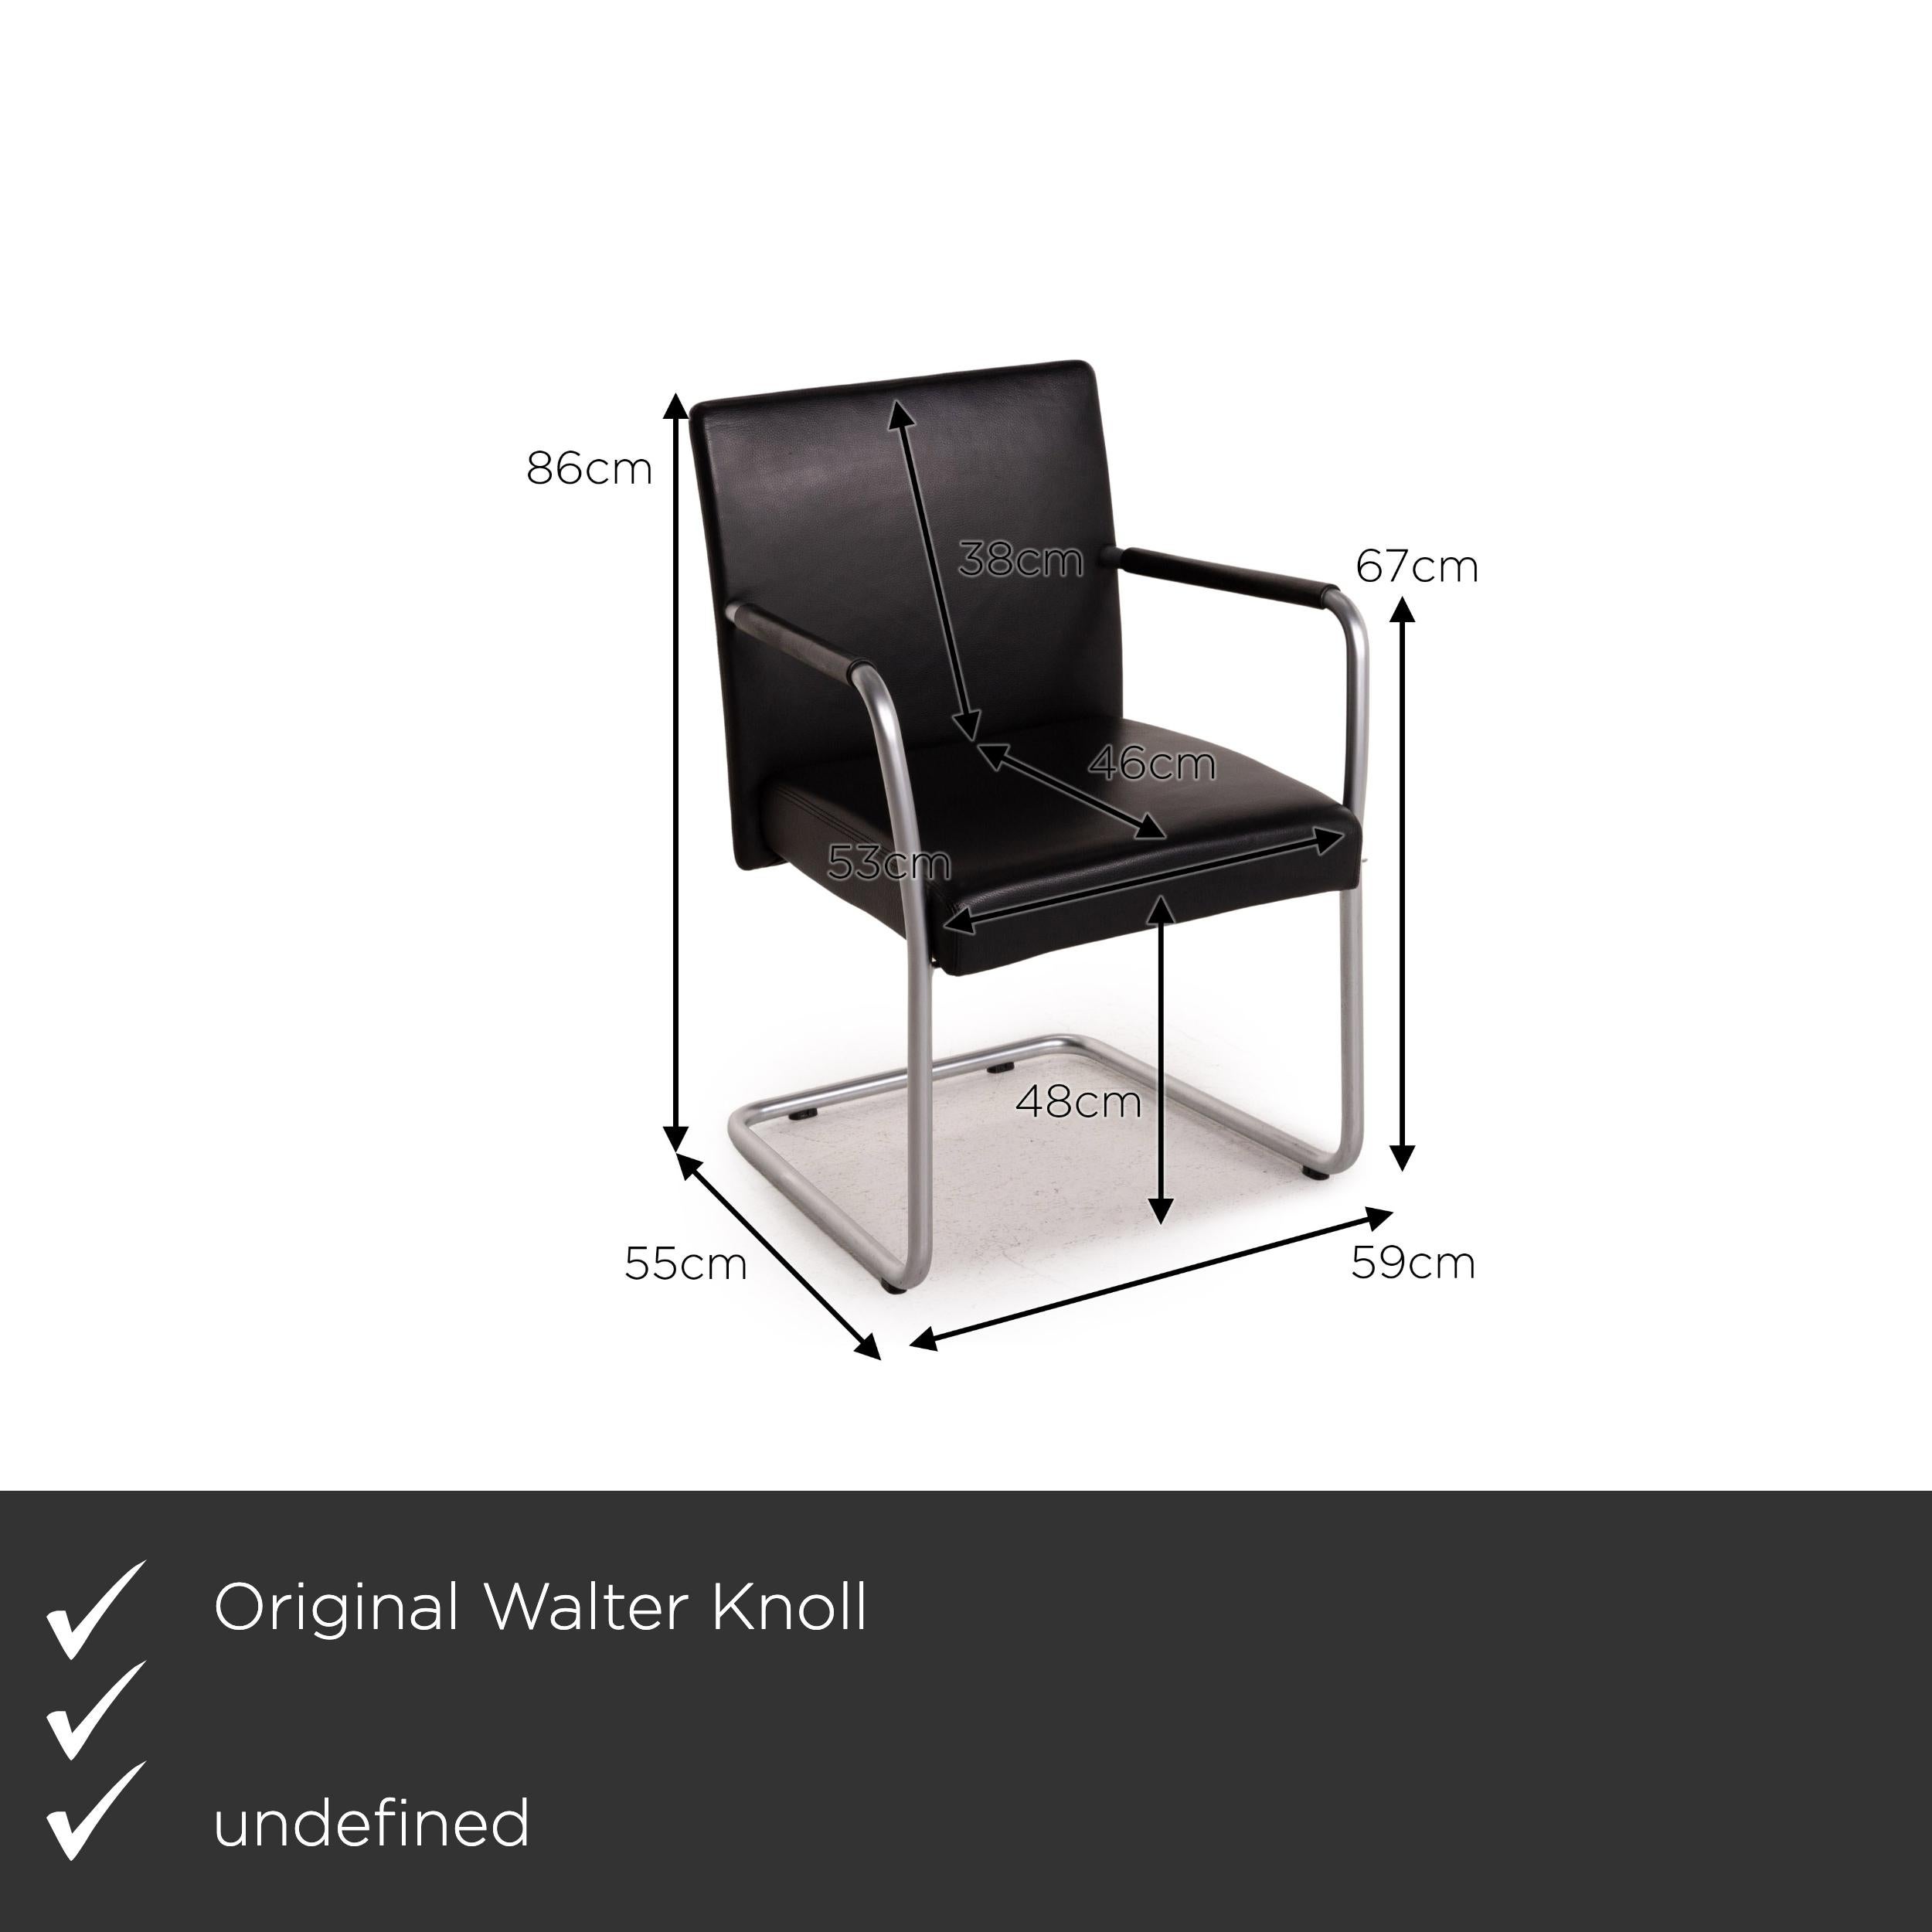 We present to you a Walter Knoll Jason 1519 leather chair set black 6x cantilever chairs.

Product measurements in centimeters:

Depth: 55
Width: 59
Height: 86
Seat height: 48
Rest height: 67
Seat depth: 46
Seat width: 53
Back height: